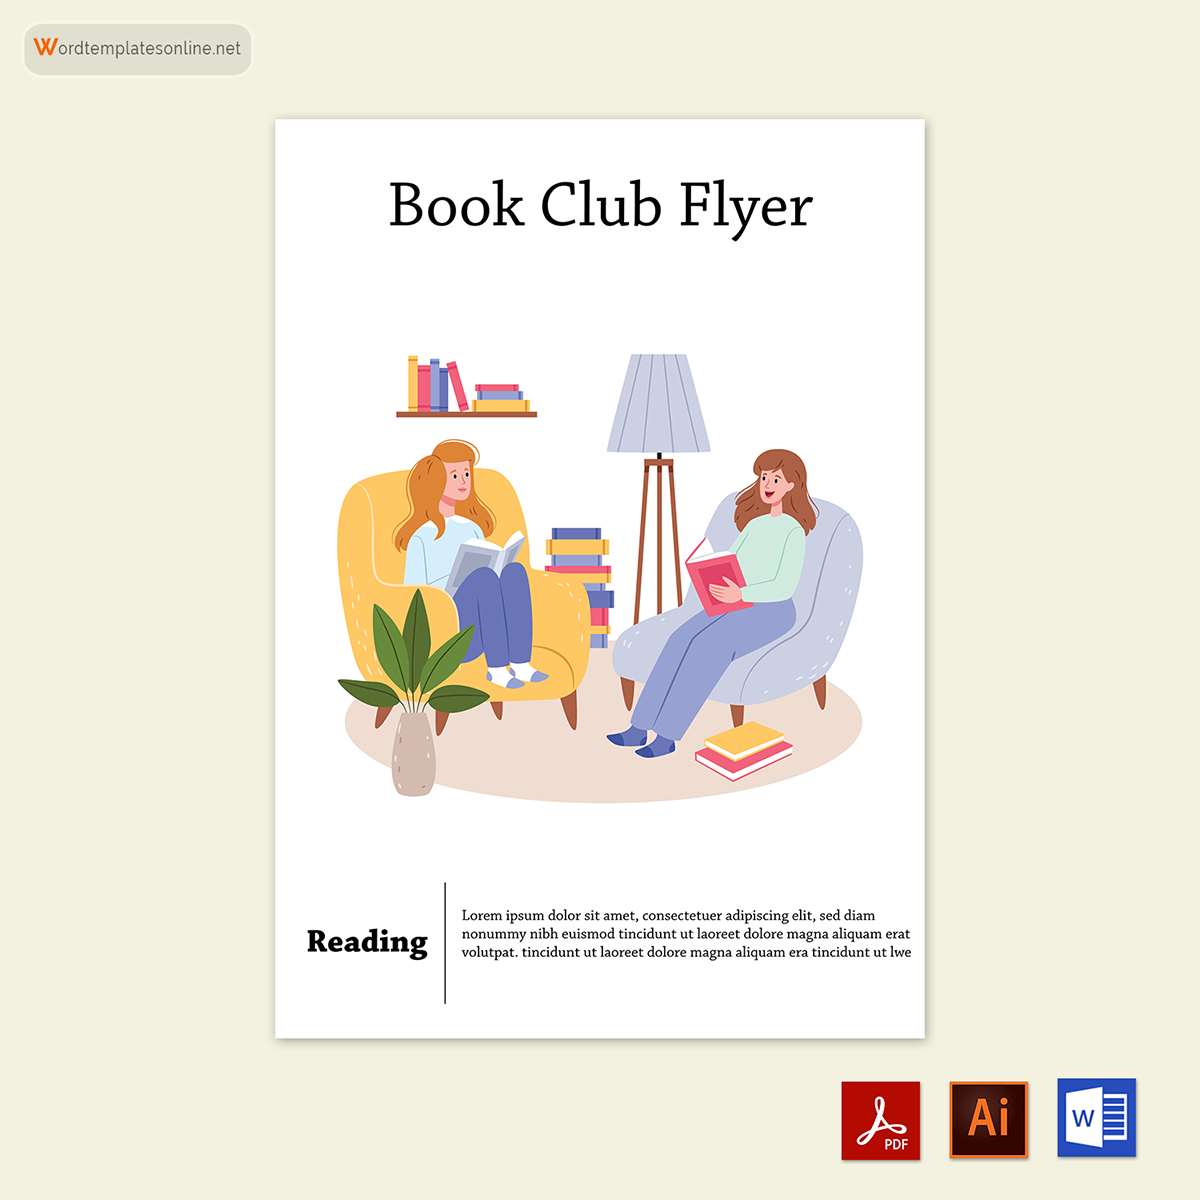 Creative Book Club Flyer Templates - Free Word, PSD, AI Example